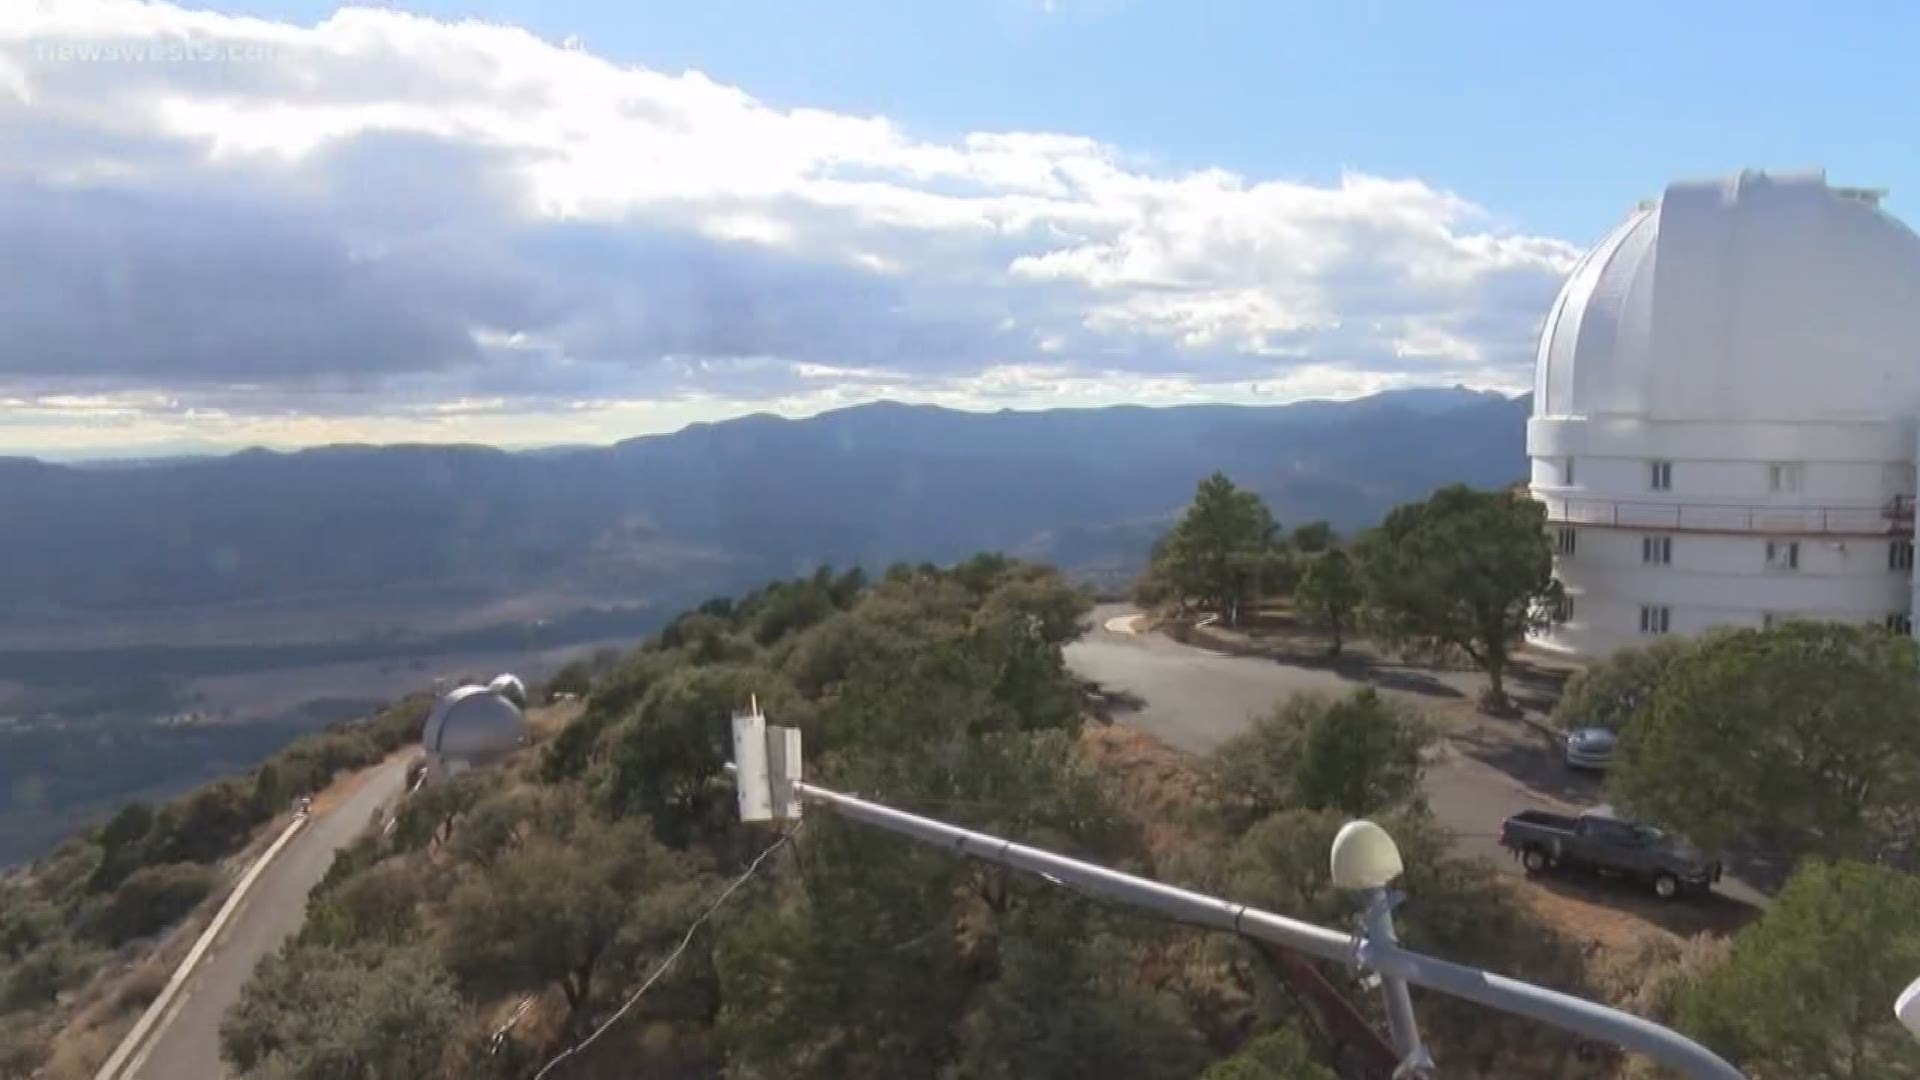 Join Basin PBS at the McDonald Observatory